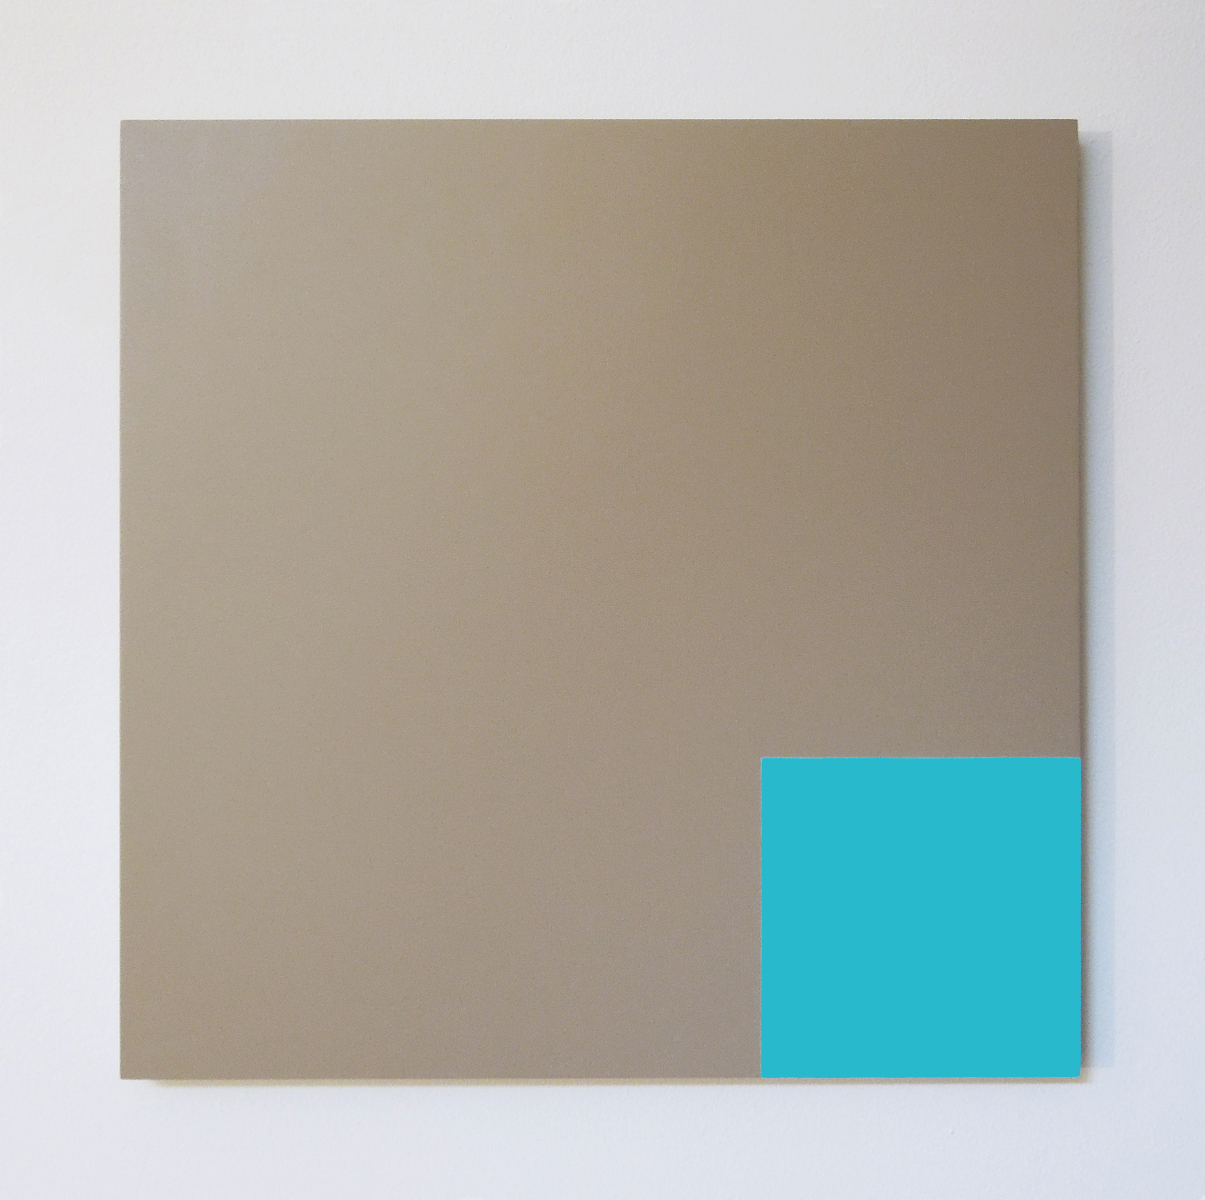 A minimalist taupe square panel with a turquoise square painted in one corner.